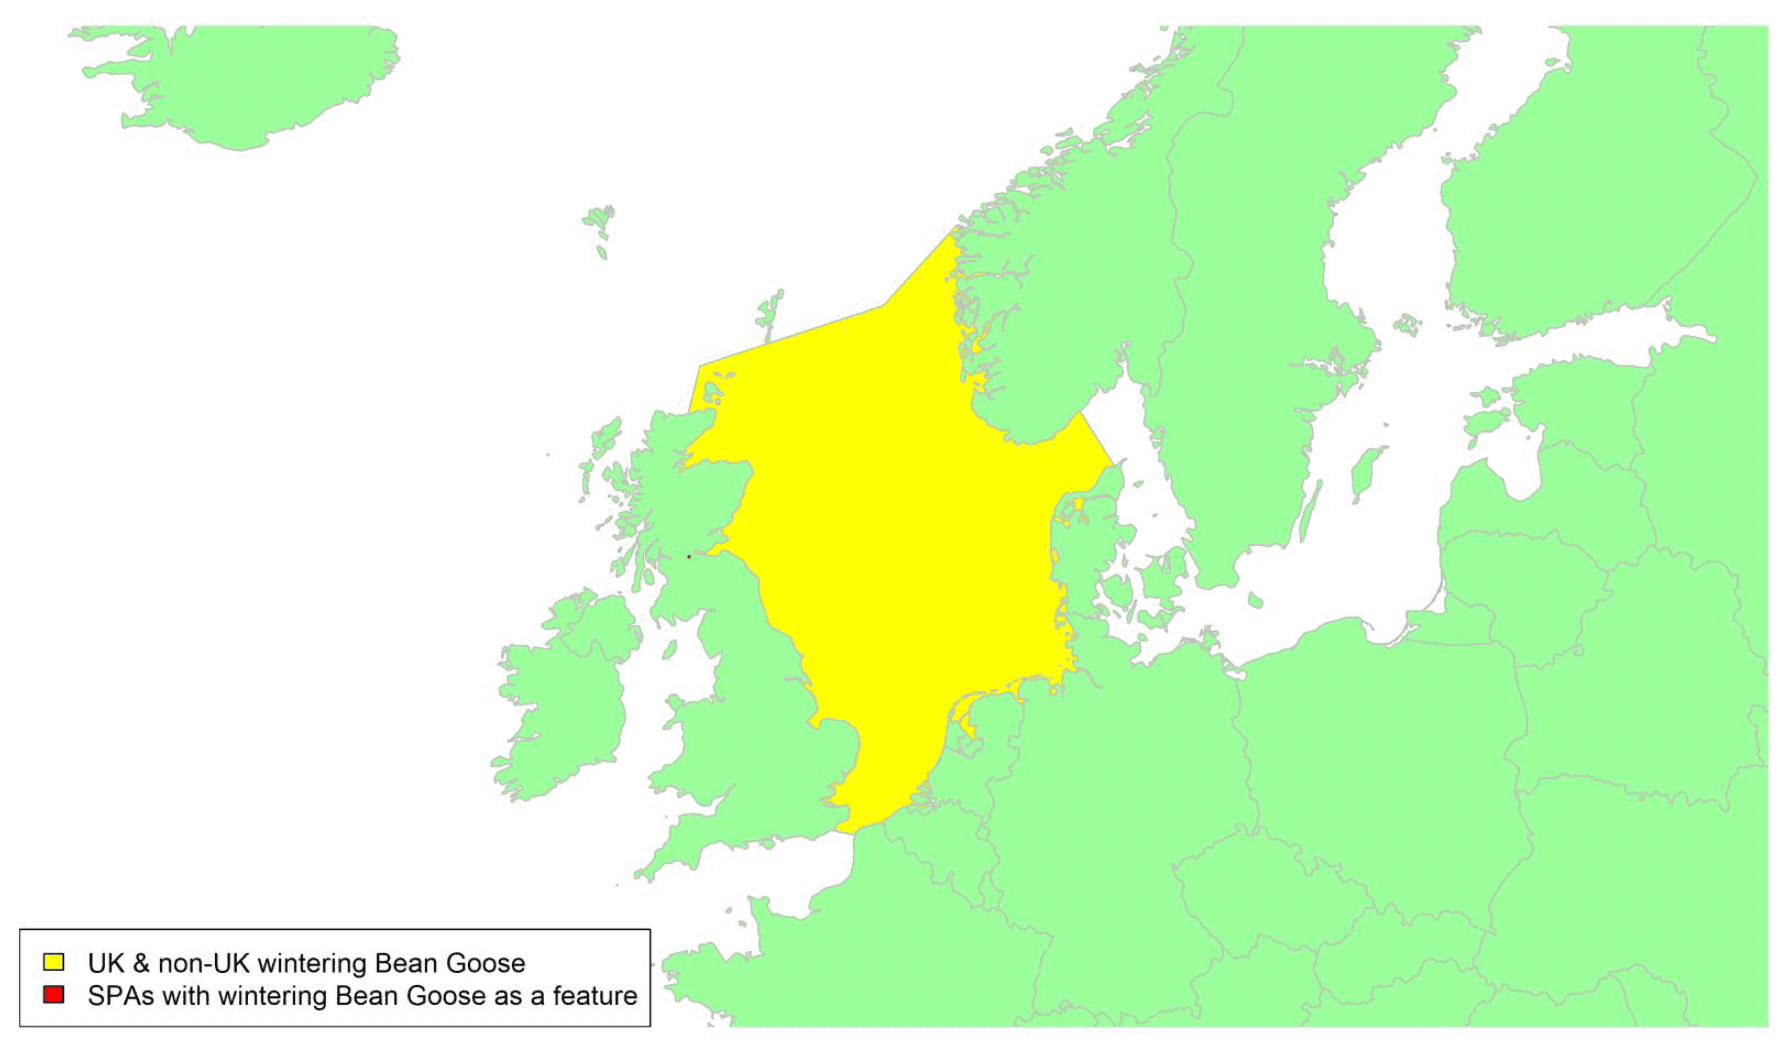 Map of North West Europe showing migratory routes and SPAs within the UK for Taiga Bean Goose as described in the text below.